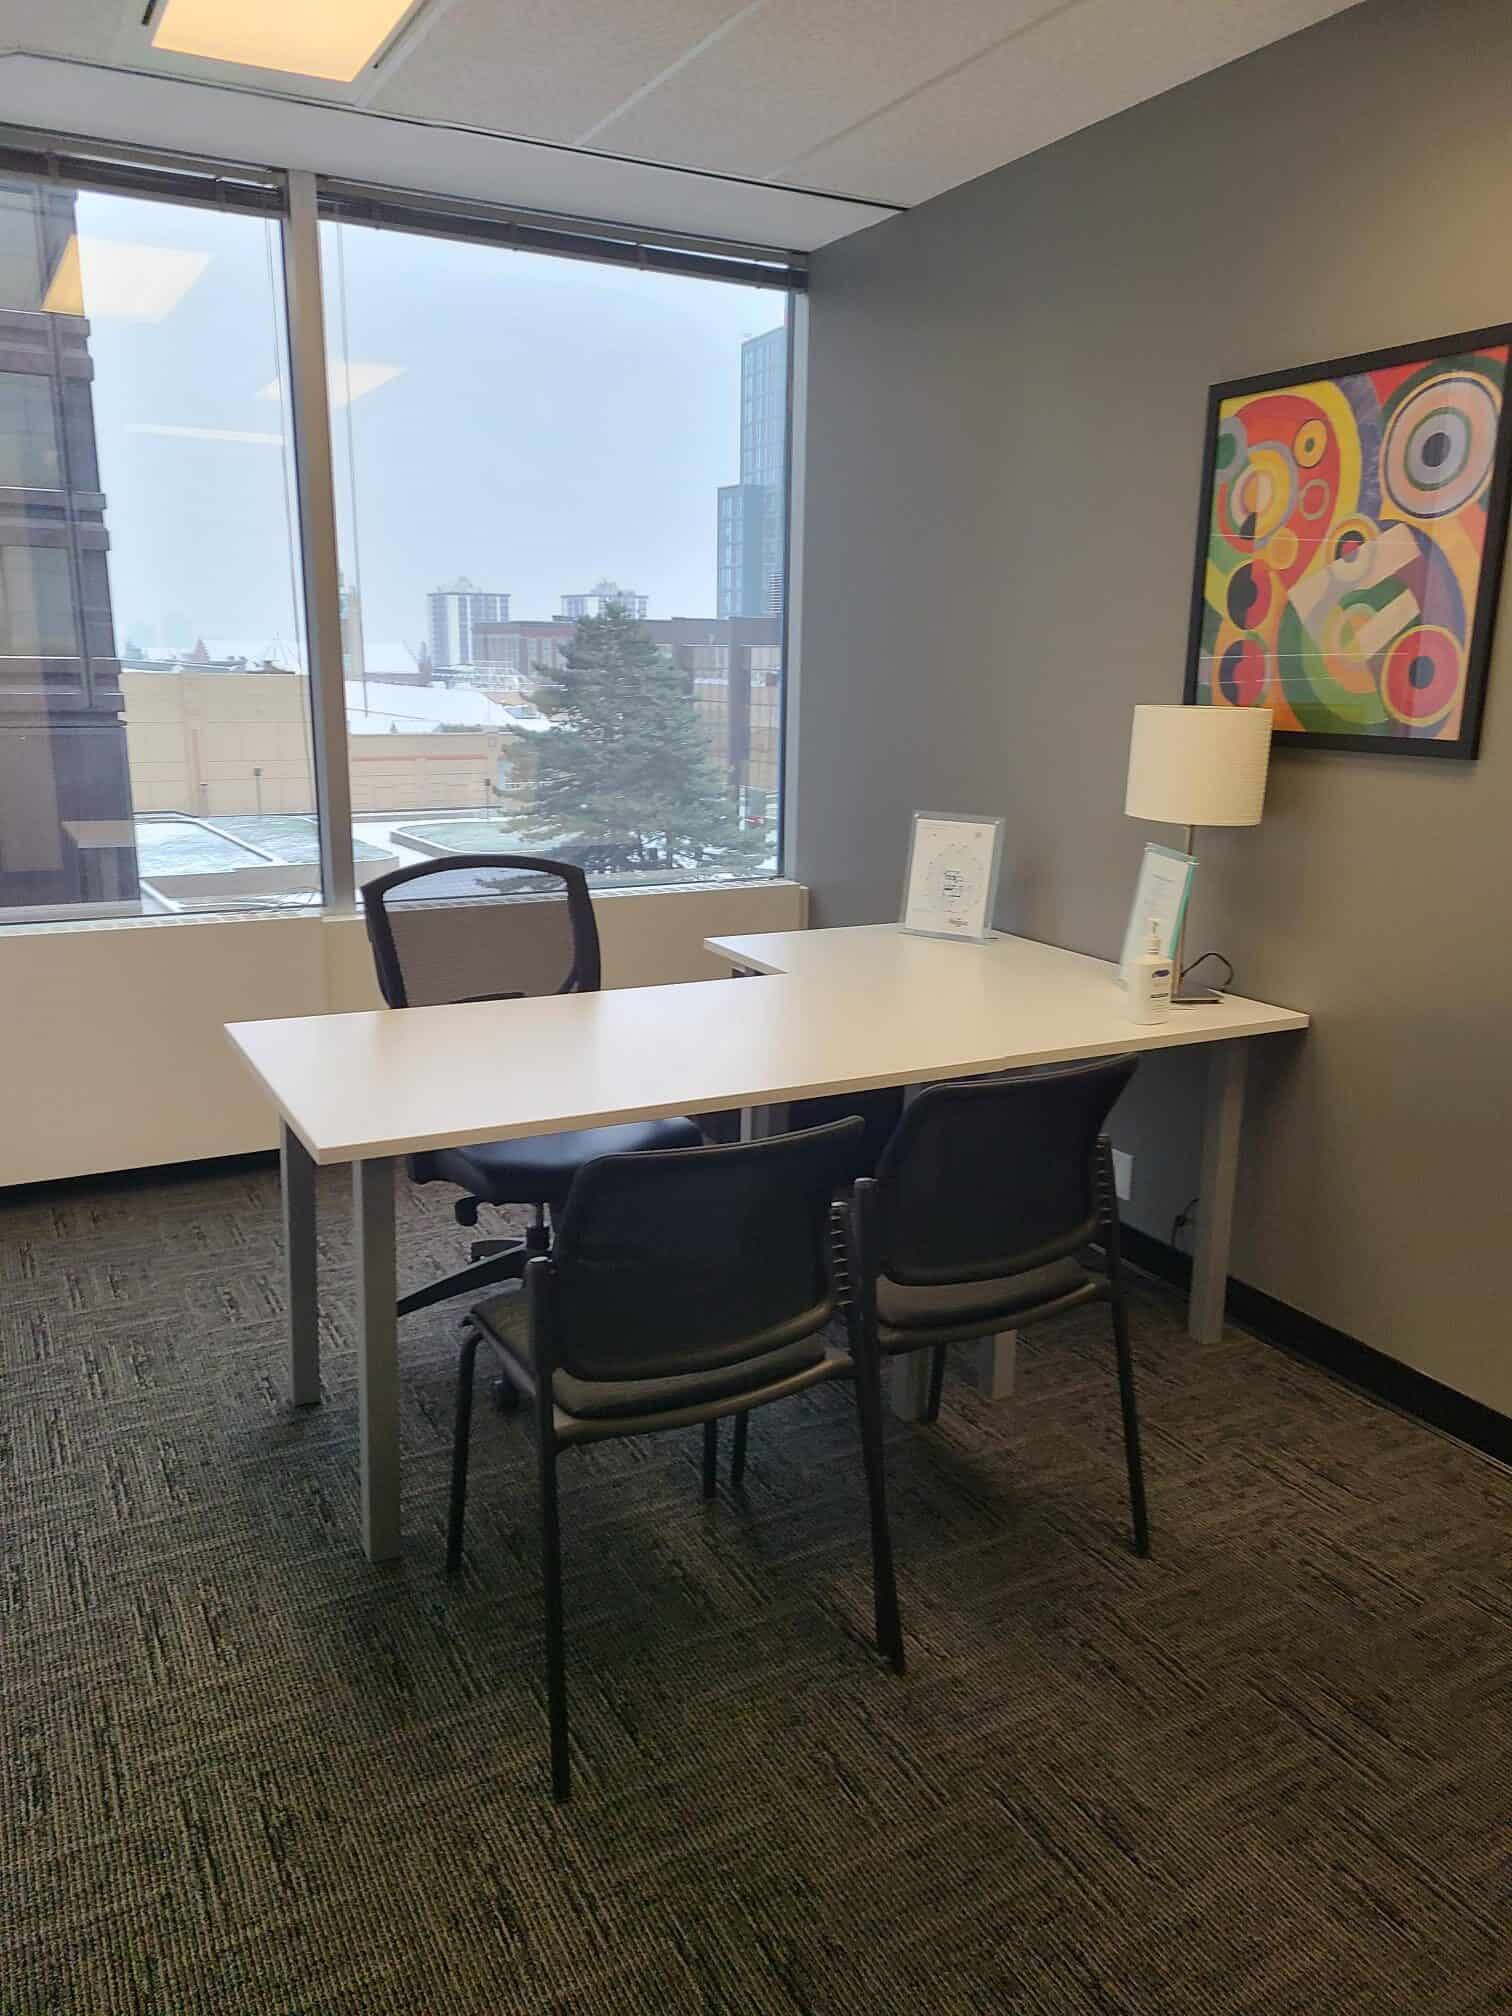 A picture of an office, with an L-shaped desk in front of a window with colorful art on the wall.